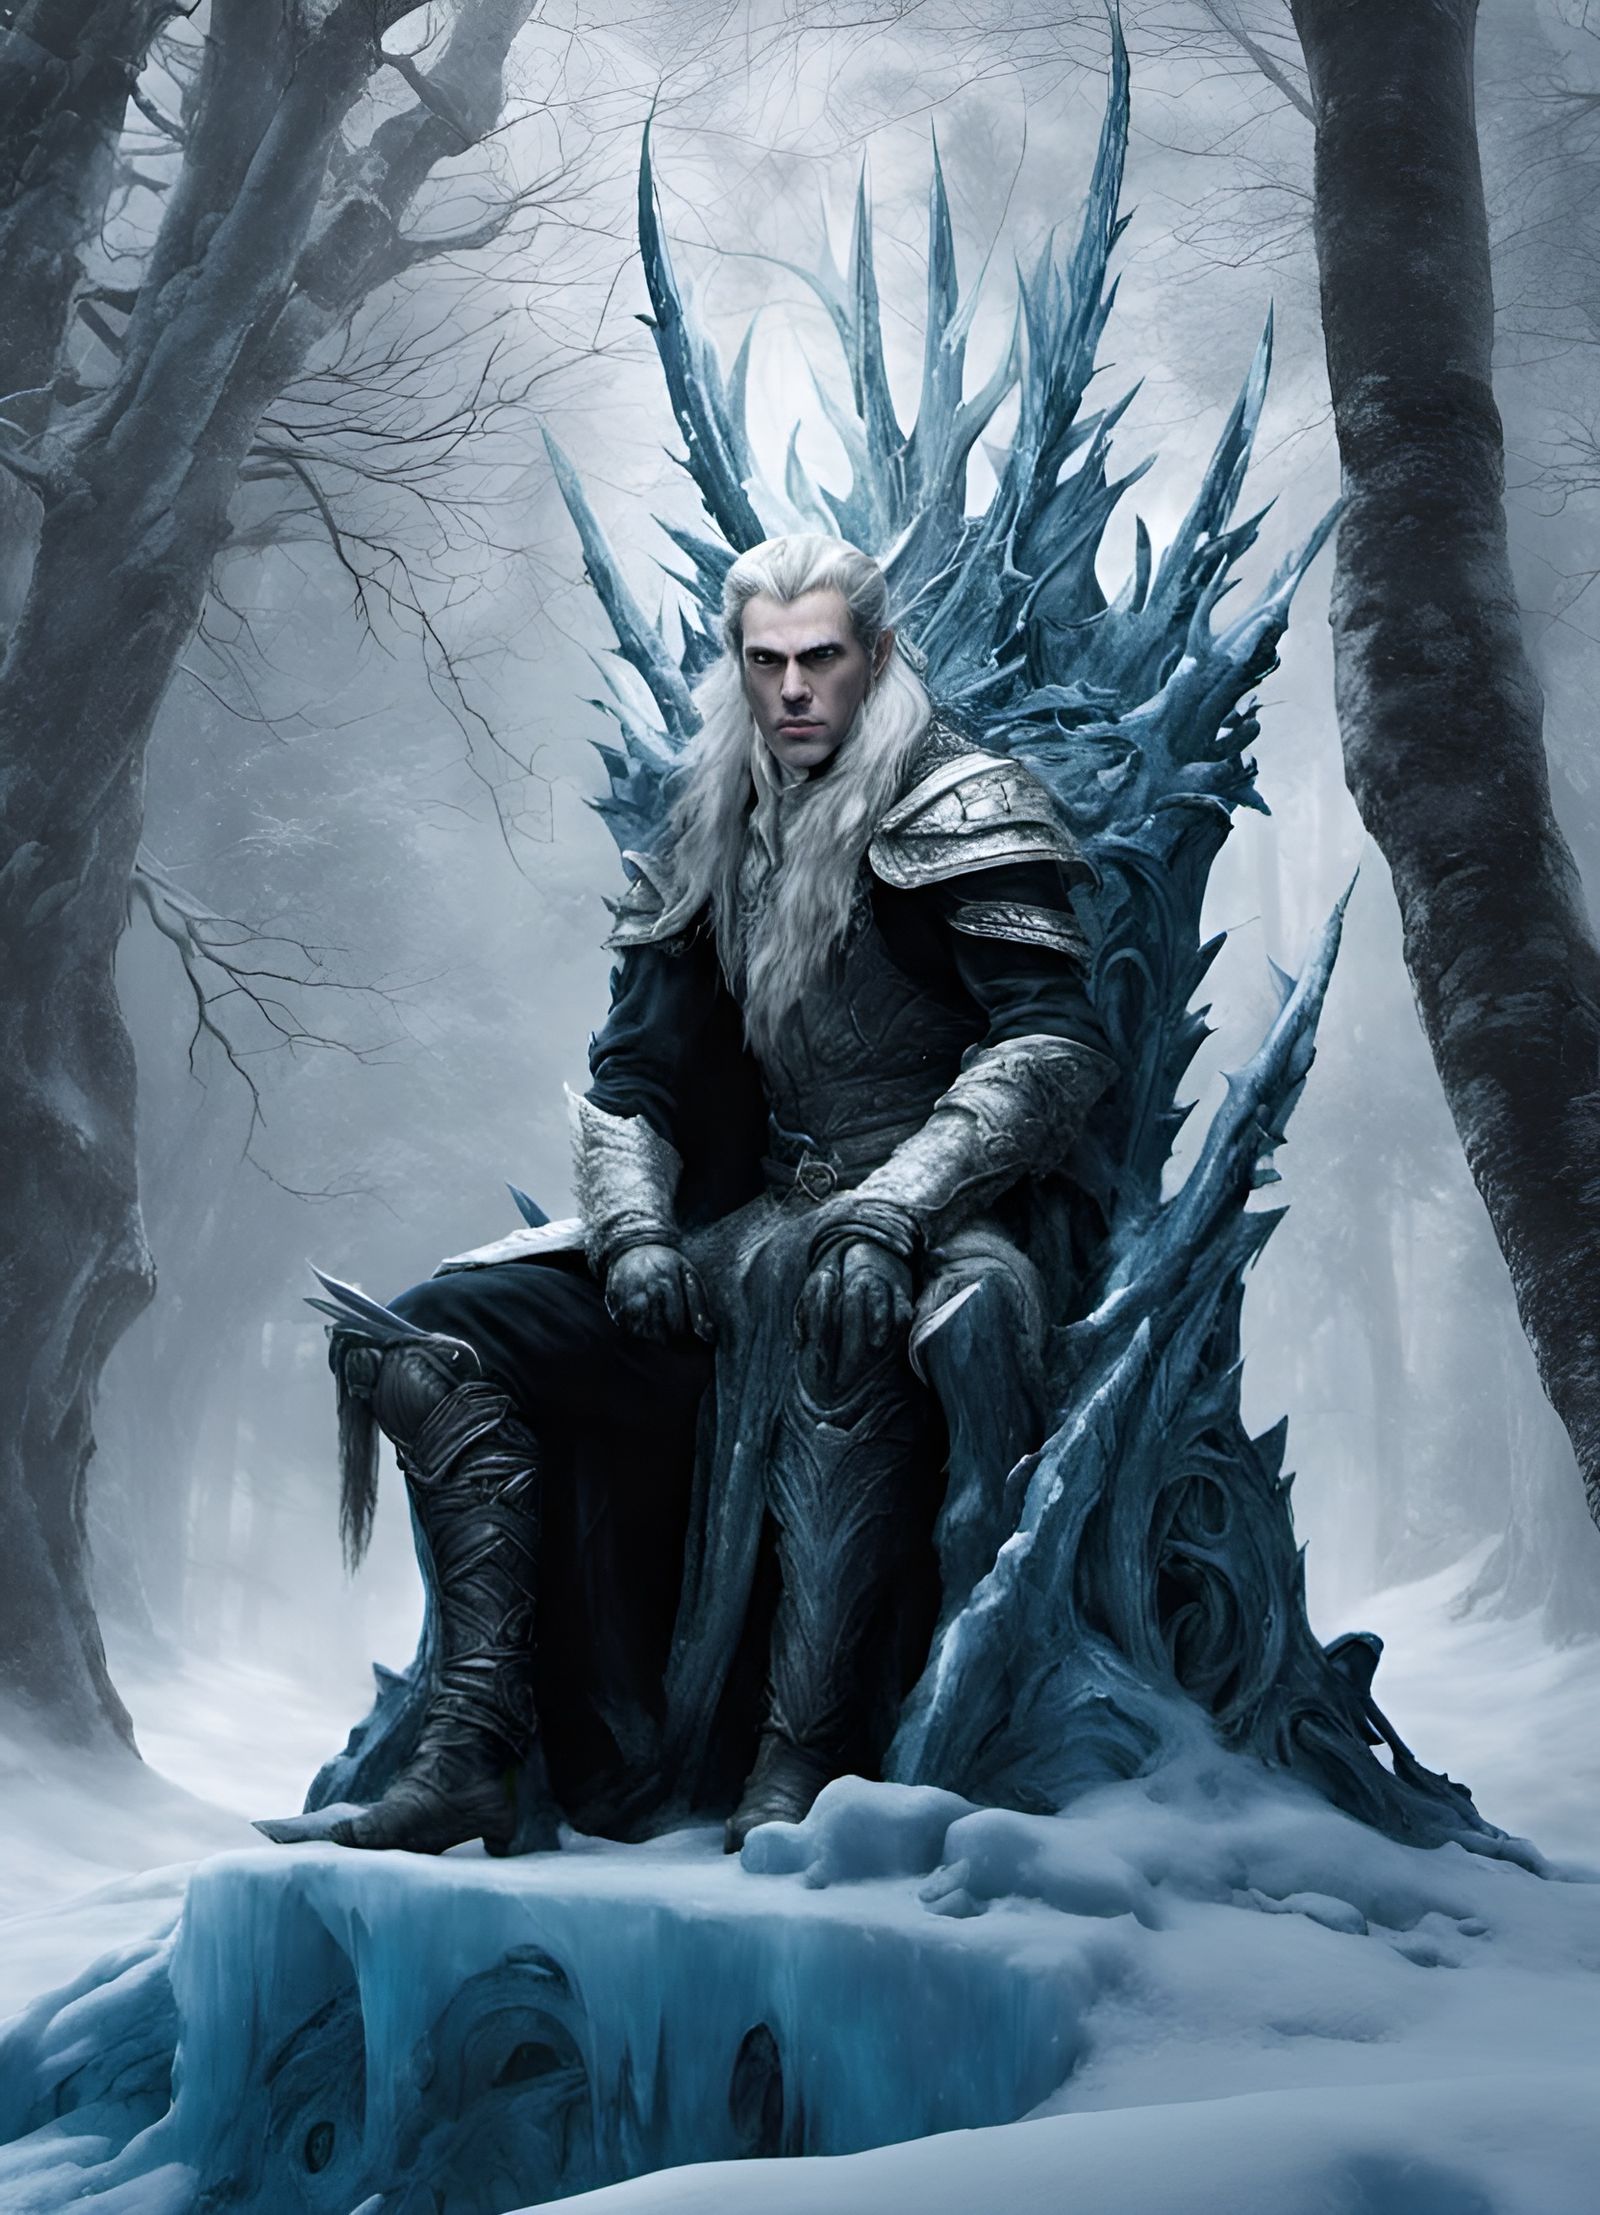 The winter king